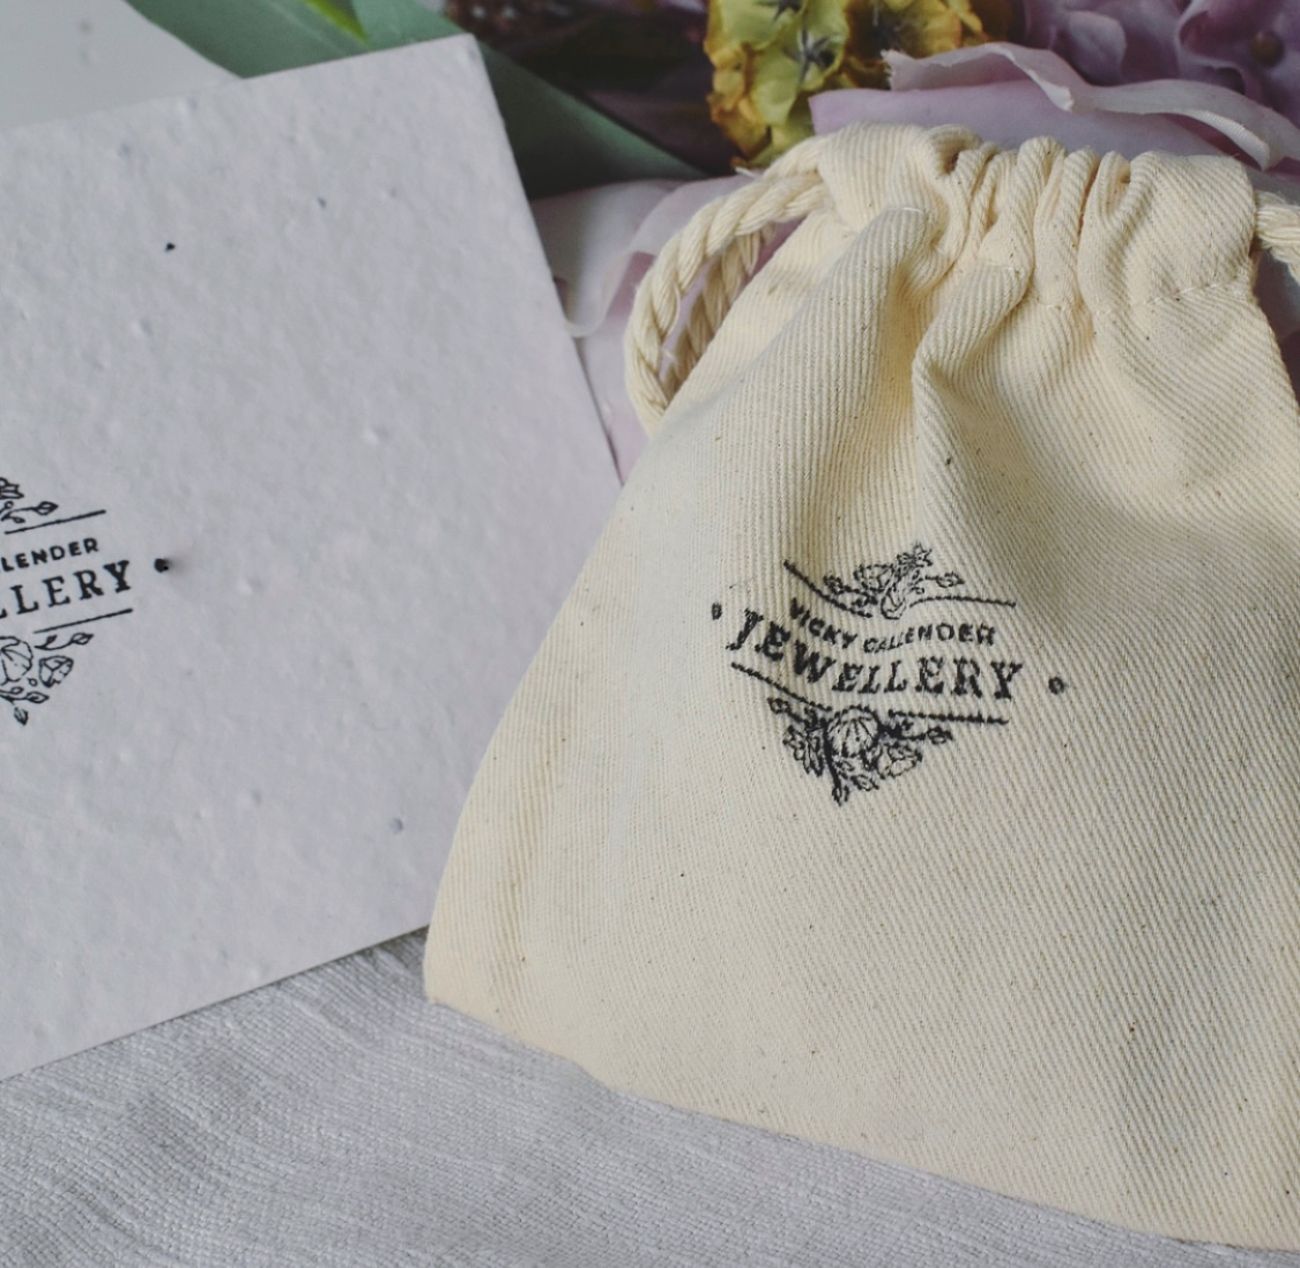 Eco friendly packaging and plantable gift tag and card by Vicky Callender Jewellery